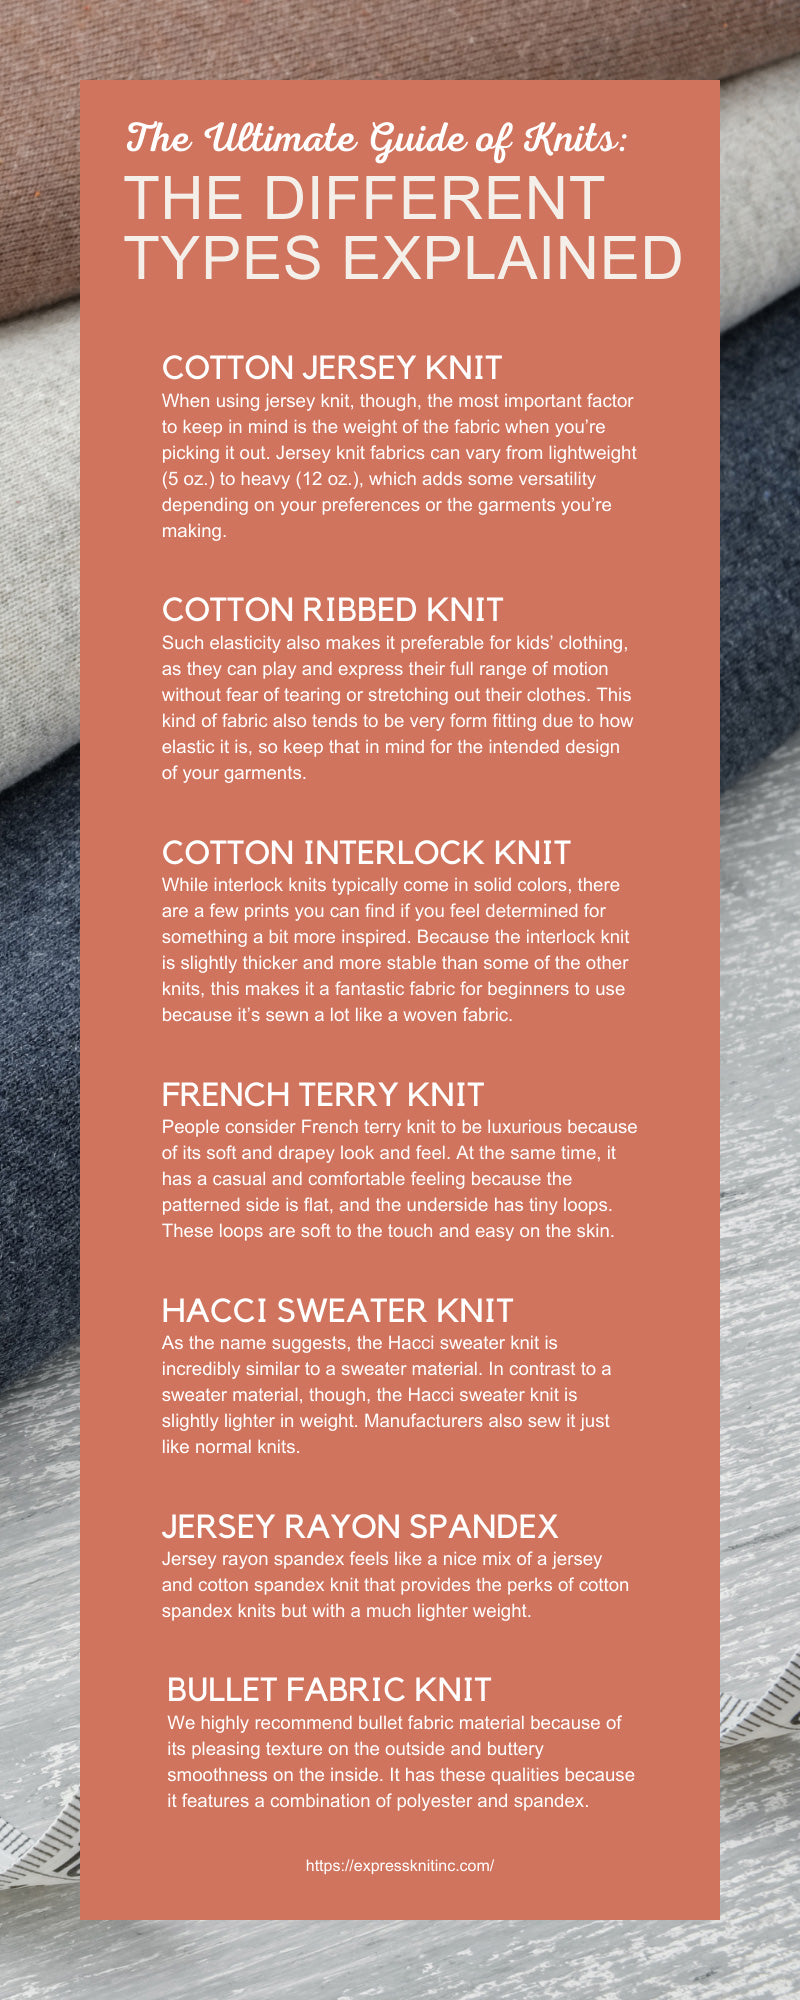 The Ultimate Guide of Knits: The Different Types Explained